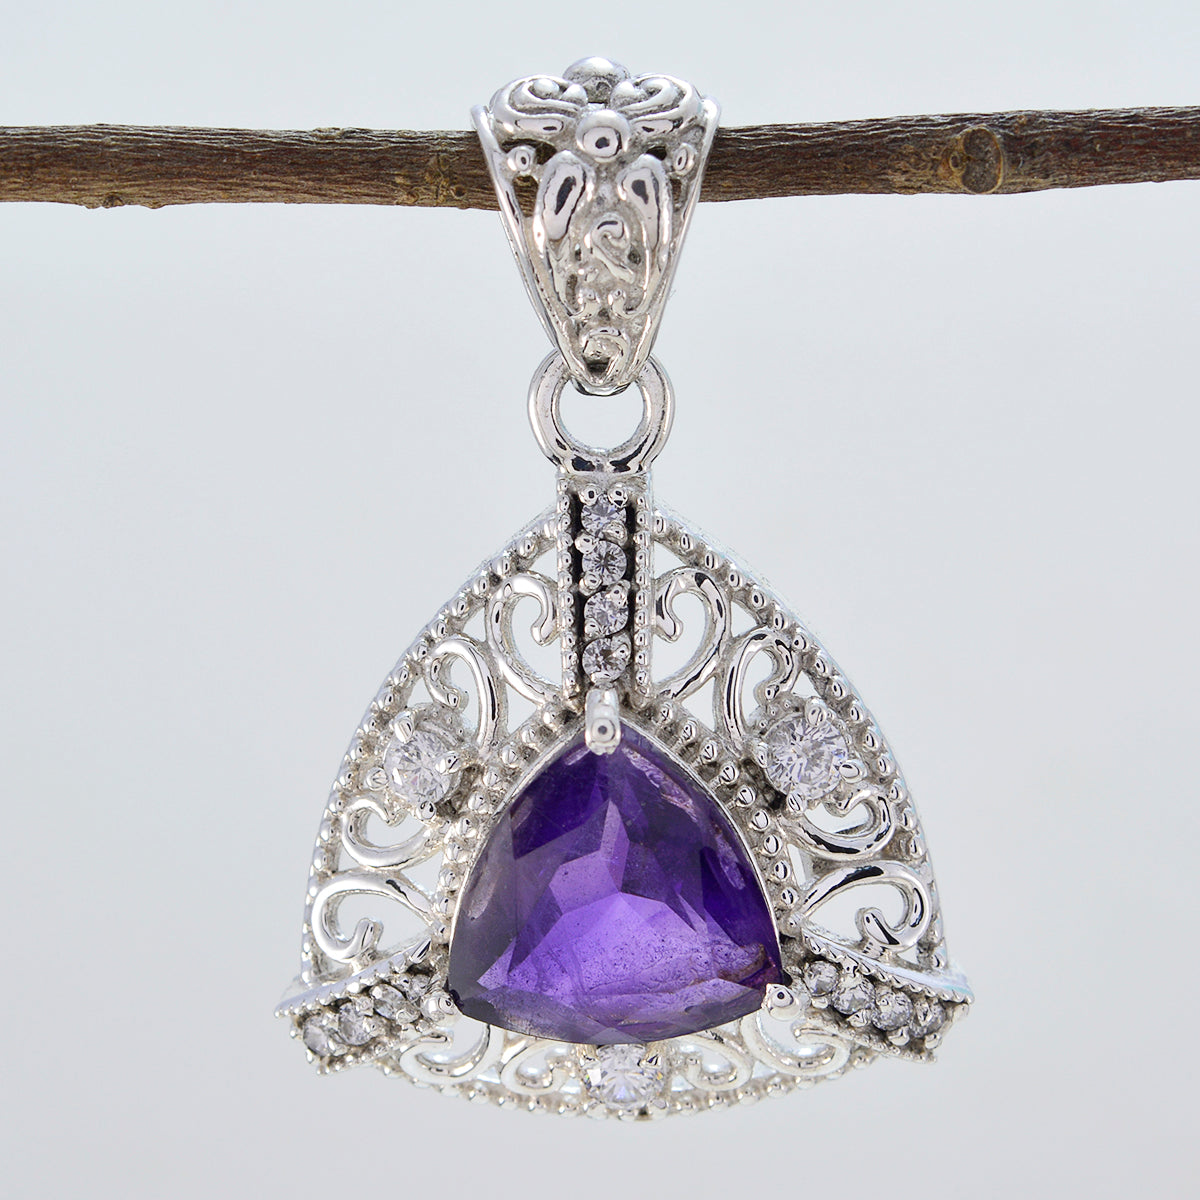 Riyo Real Gemstones Triangle Faceted Purple Amethyst Solid Silver Pendant gift for mom birthday